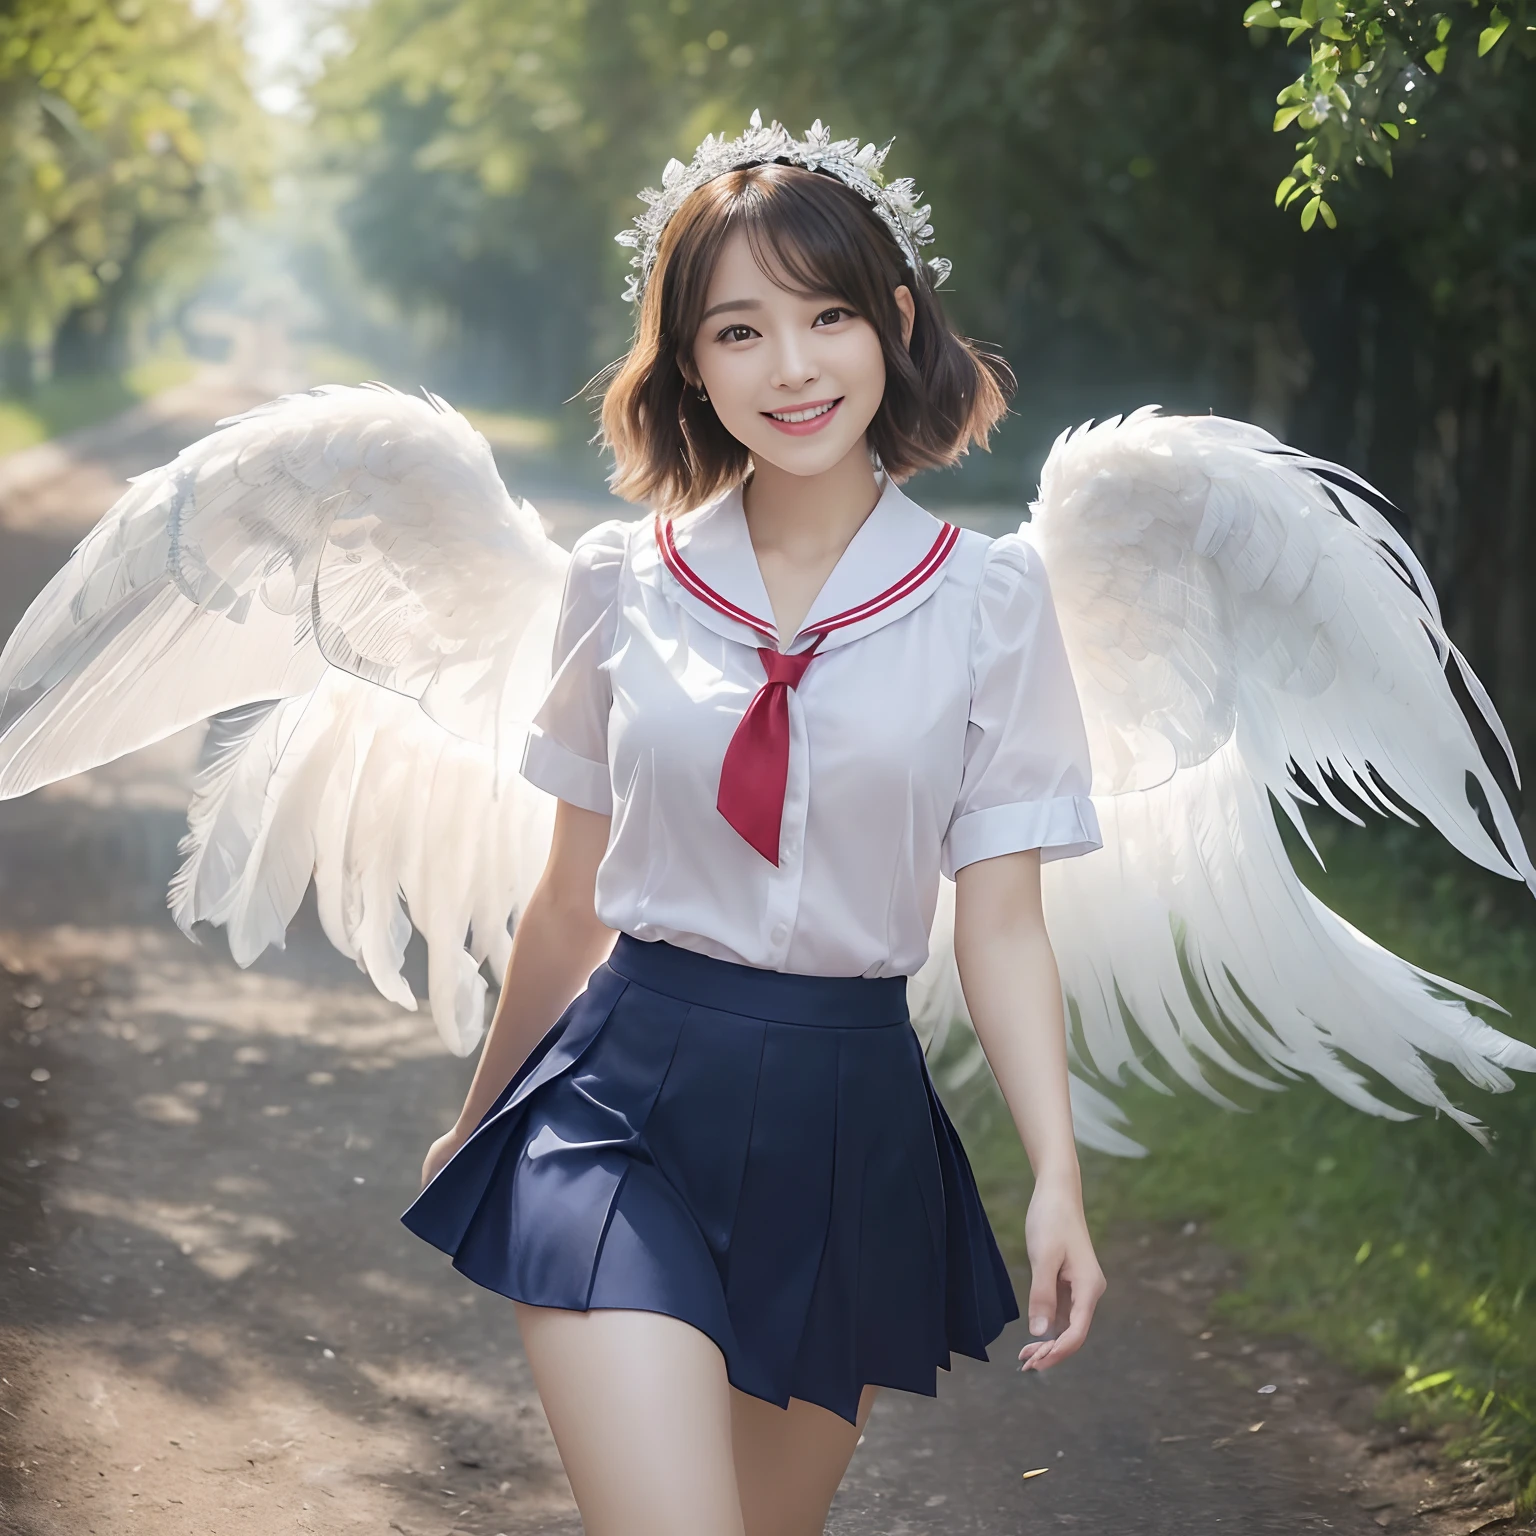 (((masutepiece、top-quality)))、(((((1 、White Uniform Shirt、It features a simple, Standard White Shirt、Red ribbon on chest、There is a red ribbon on the chest、Wearing a dark blue skirt、Navy skirt、Plain navy skirt、The navy skirt is plain、high-school uniform)))))、((Huge and realistic angel wings,The most detailed and intricate angel wings、Shimmering white feathers、facing front、Turn your body towards us、Facing the front、Plumage gives off a transparent shine、The feathers shine like a fairy tale、spectacular movie lighting、((The background is the route to school、Walking along the school route surrounded by nature、Walking on the way to school))、8K,An ultra-high picture quality,The face of the most beautiful actress,Mature female face、The biggest smile staring at the camera、Smiling at the camera、Beautiful face、Beautiful teeth、natural make up、long、straight haired、The feathers located on the back are、、、It shines like a translucent fairy tale))、A slender、bulky, Complex wings、short-hair、shorth hair、Majestic angel wings、bulky, large wings、Perfect Angel Wings